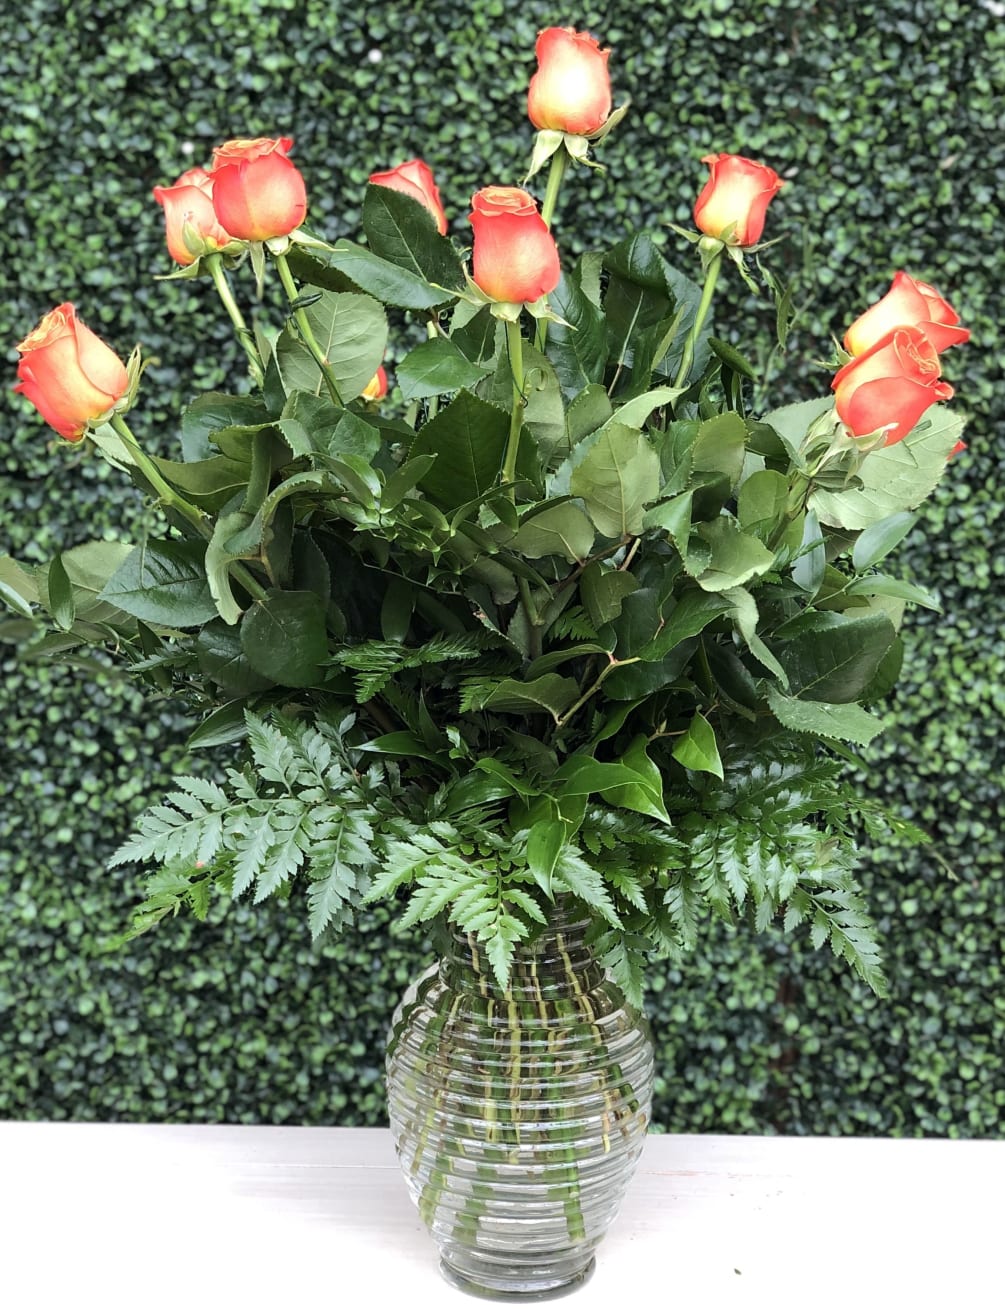 A traditional arrangement of orange roses and greens in a glass vase.